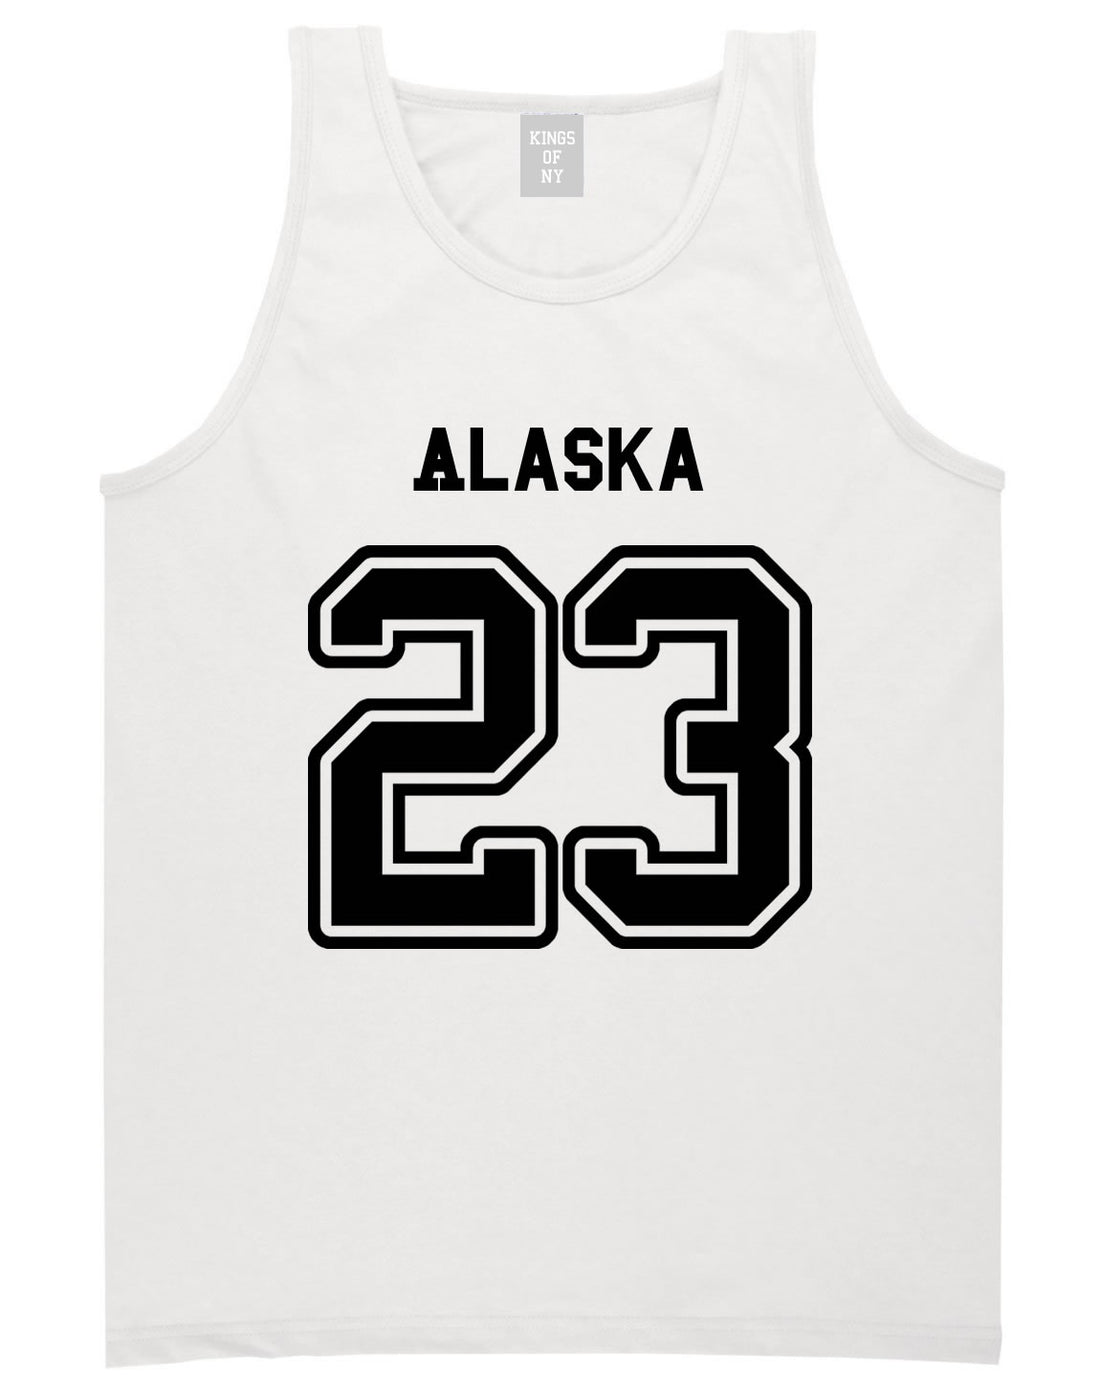 Sport Style Alaska 23 Team State Jersey Mens Tank Top By Kings Of NY